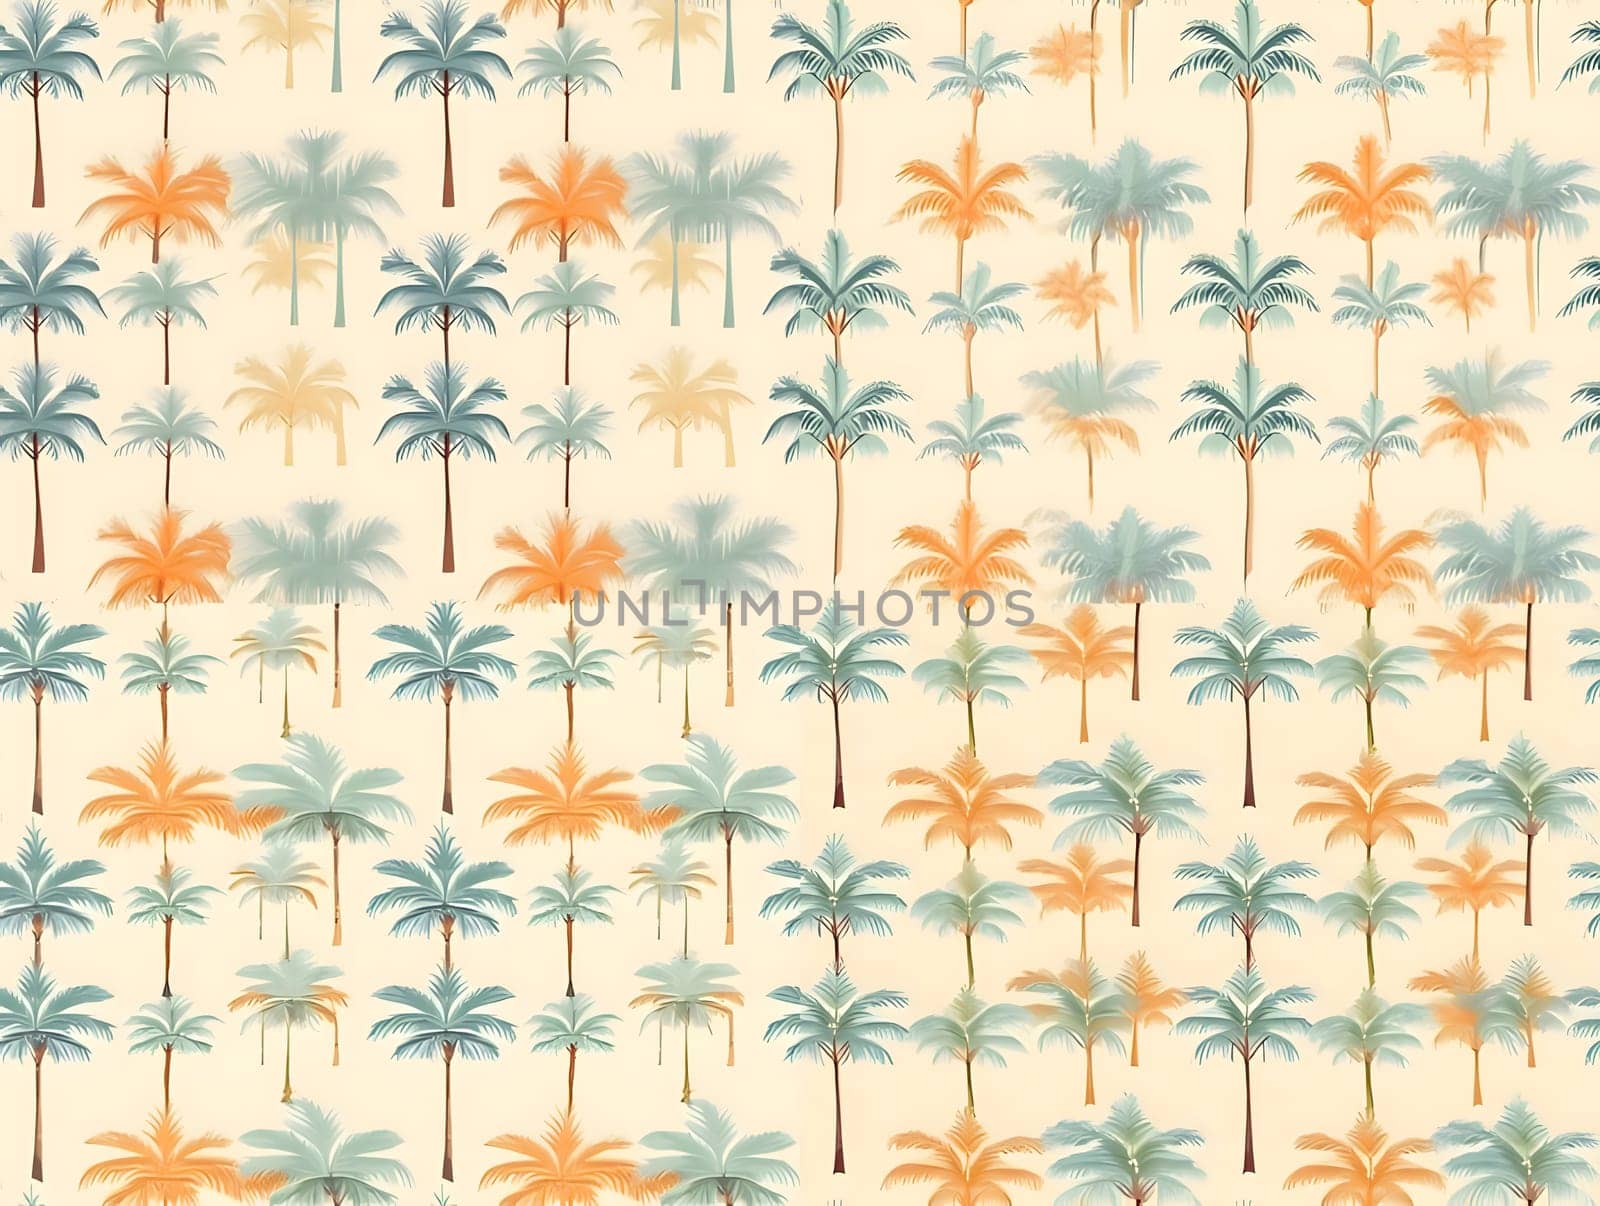 Patterns and banners backgrounds: Seamless pattern with palm trees. Vector illustration in retro style.